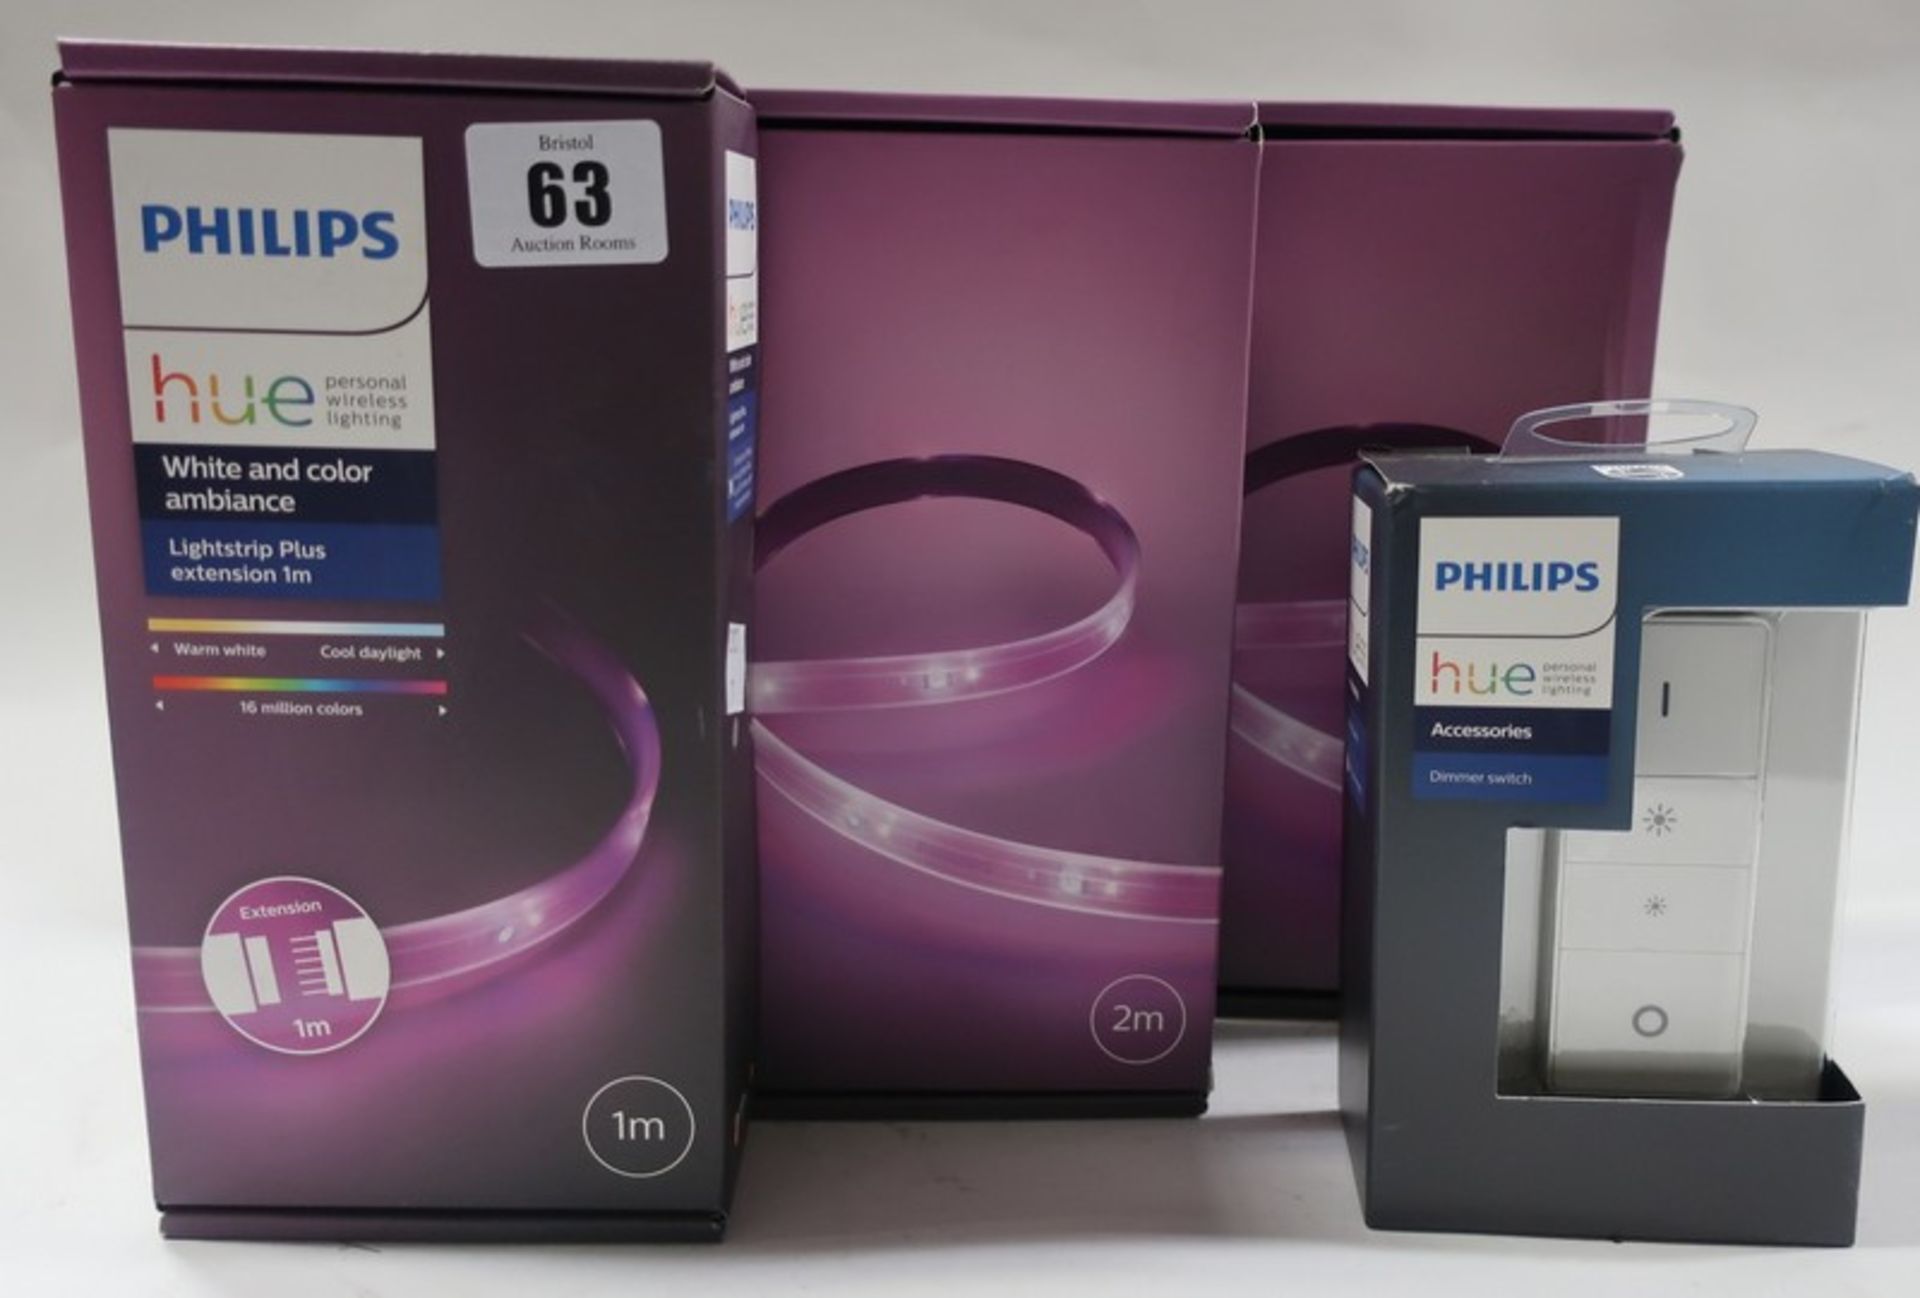 Two Philips Hue white and color ambiance Lightstrip Plus, a Lightstrip Plus extension (1m) and a Hue